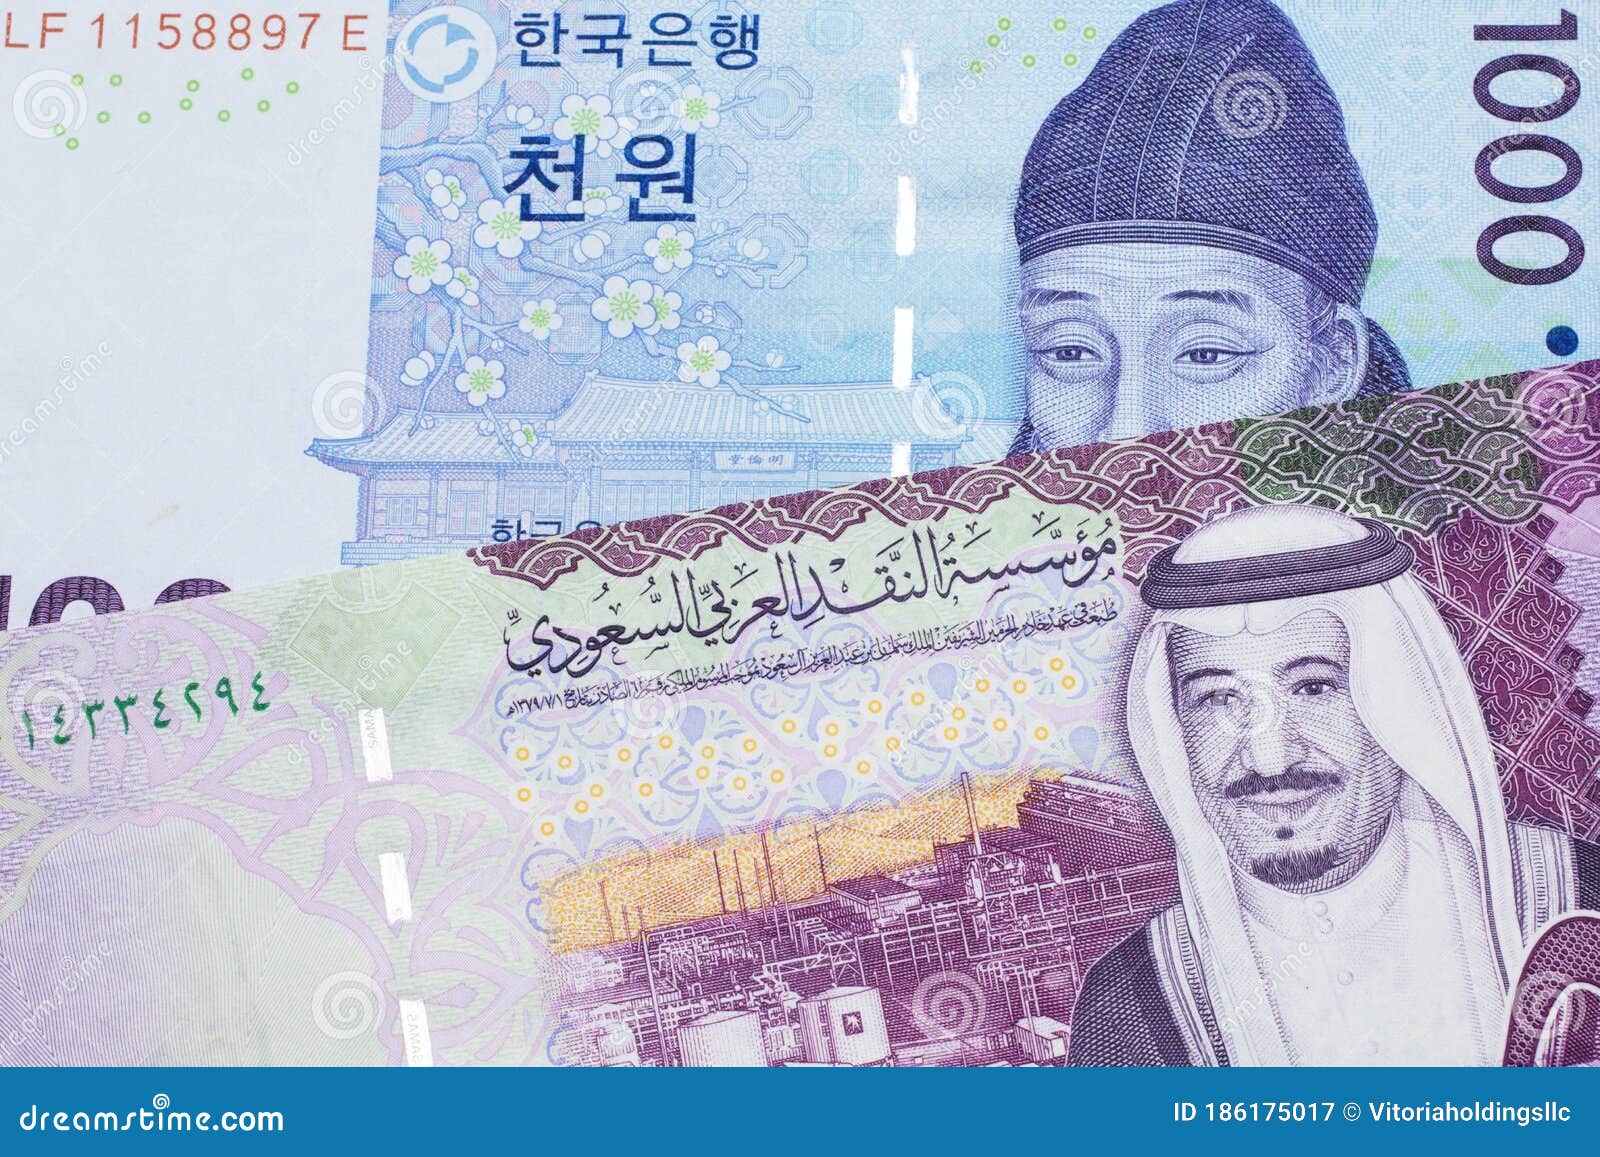 a blue won note from south korea with a five riyal note from saudi arabia